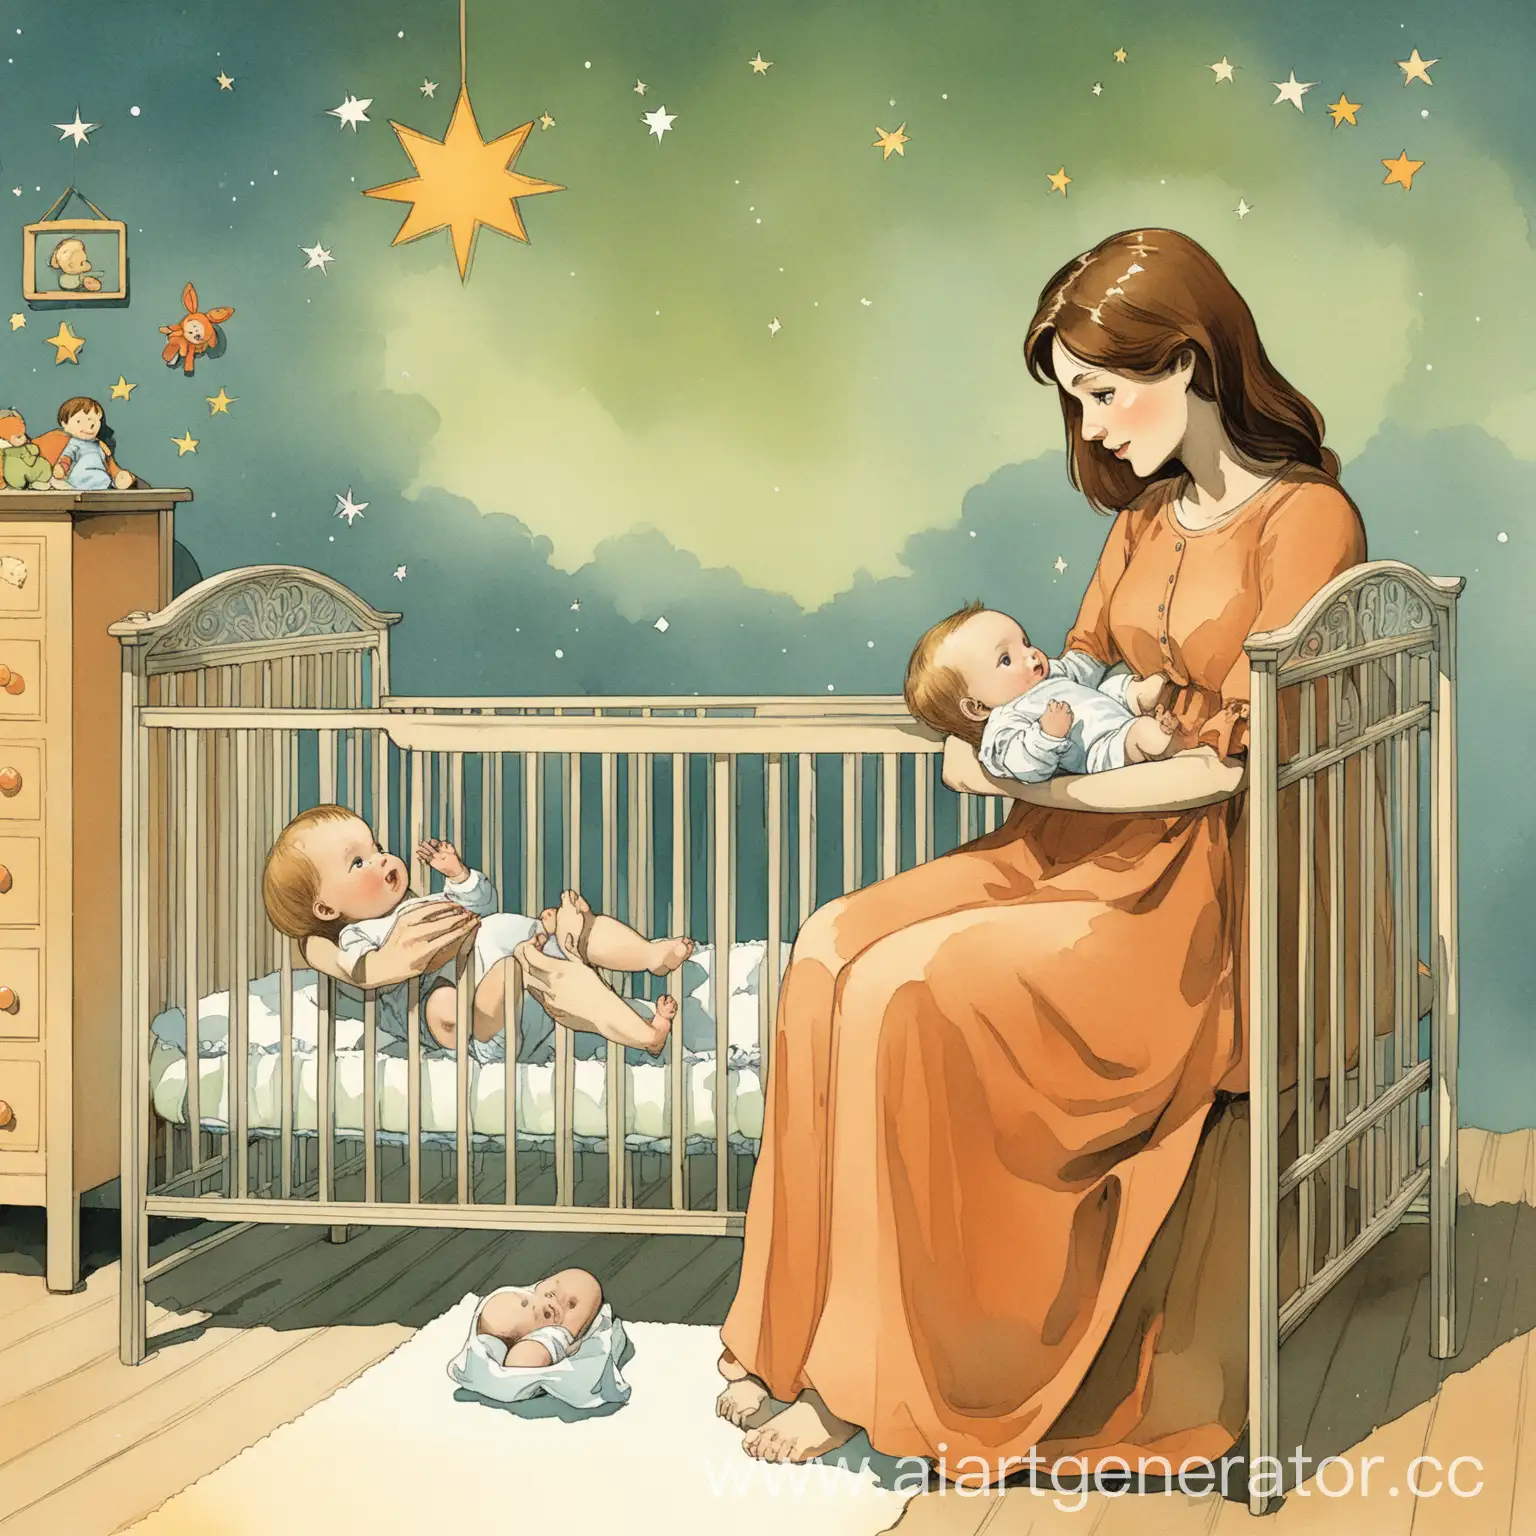 Girl-Sitting-Next-to-Crib-with-Infant-Illustration-for-Childrens-Book